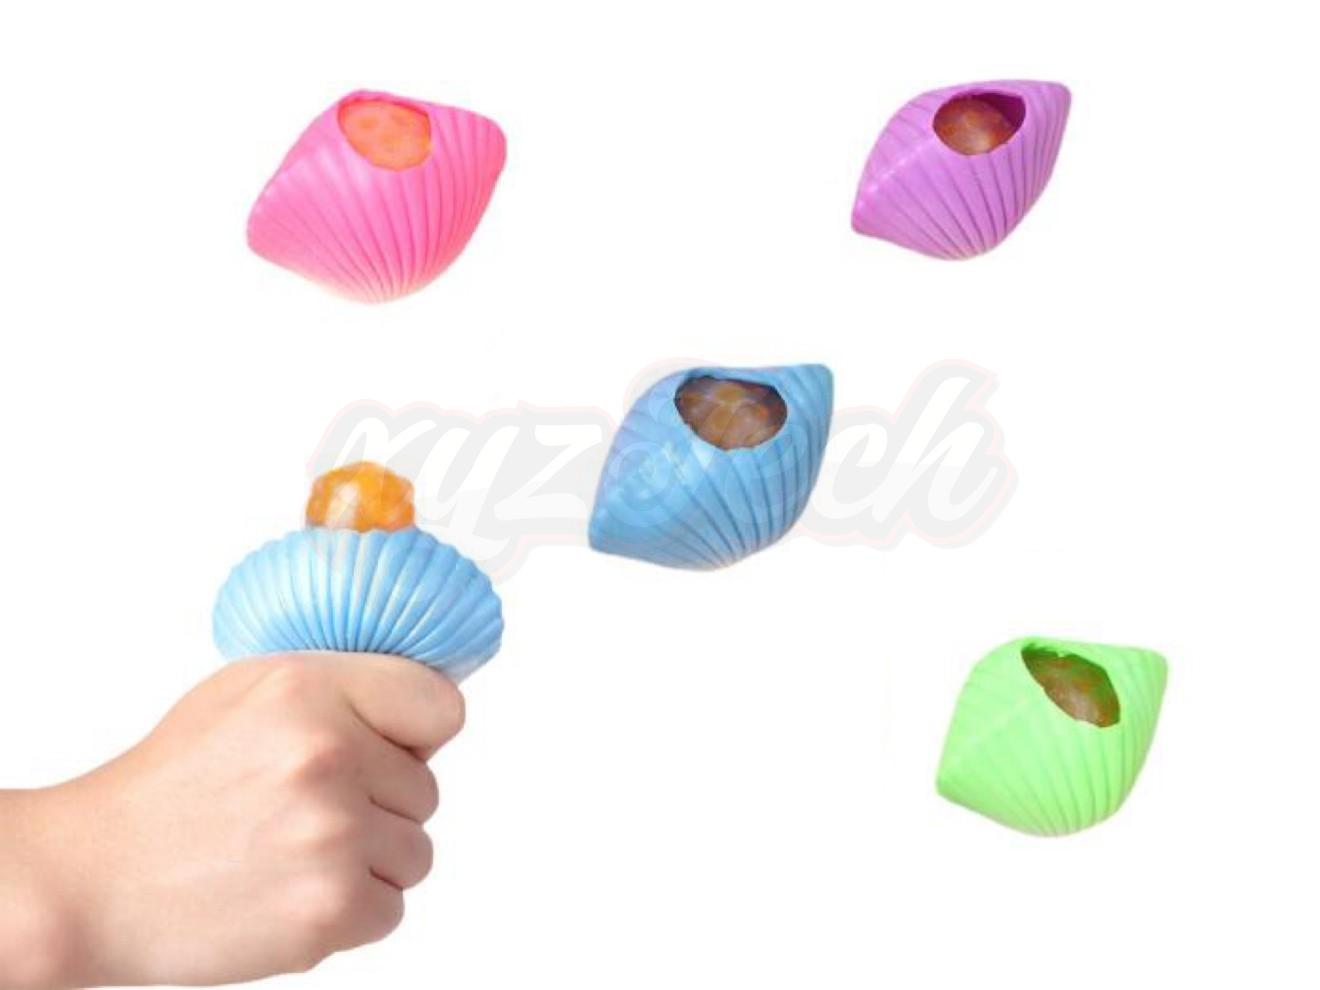 Squeeze shell with mermaid character inside